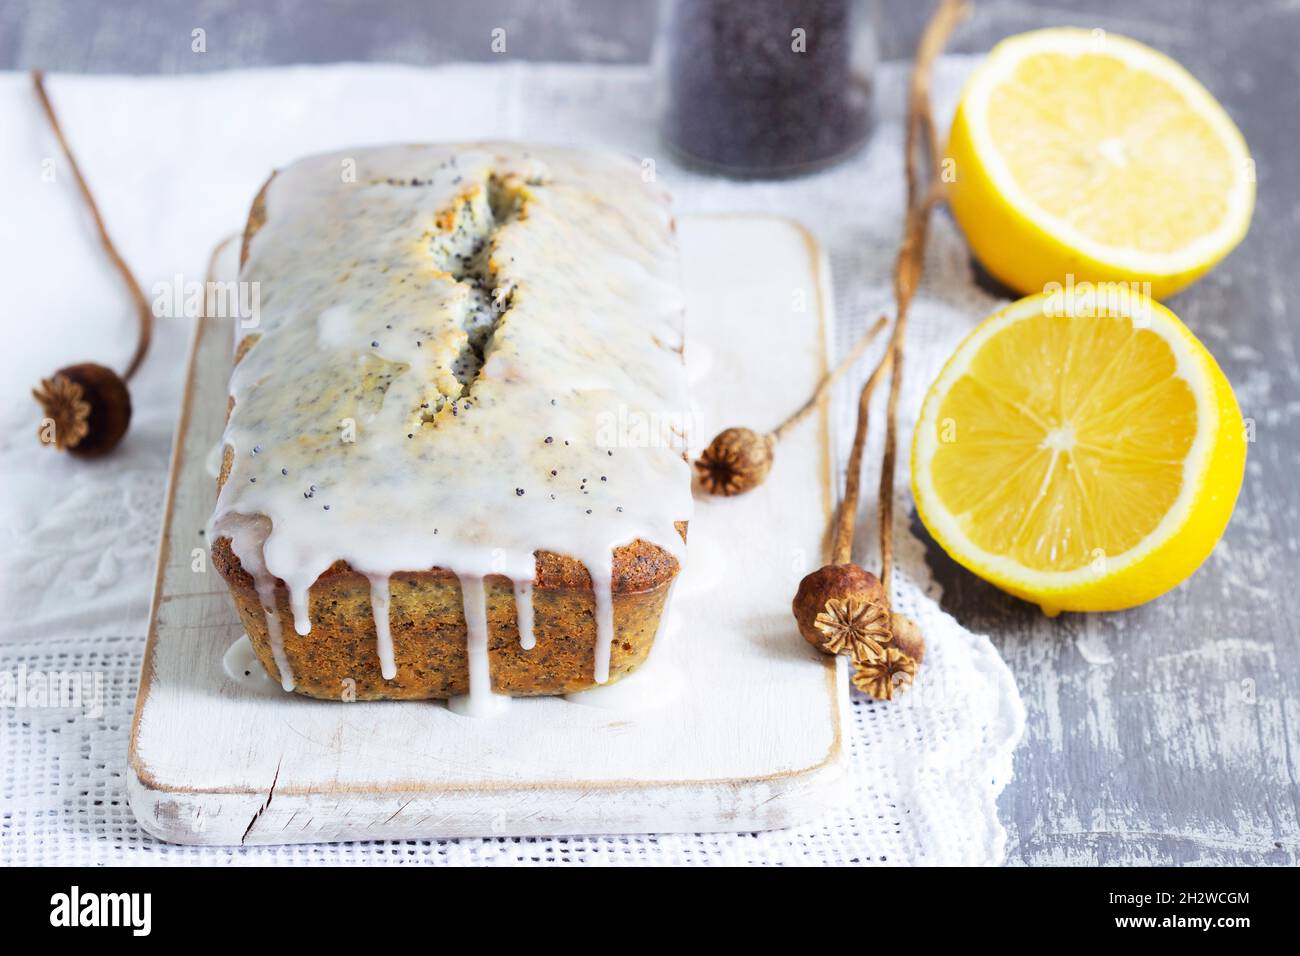 Lemon cake with poppy seeds, covered with glaze on a light background. Stock Photo